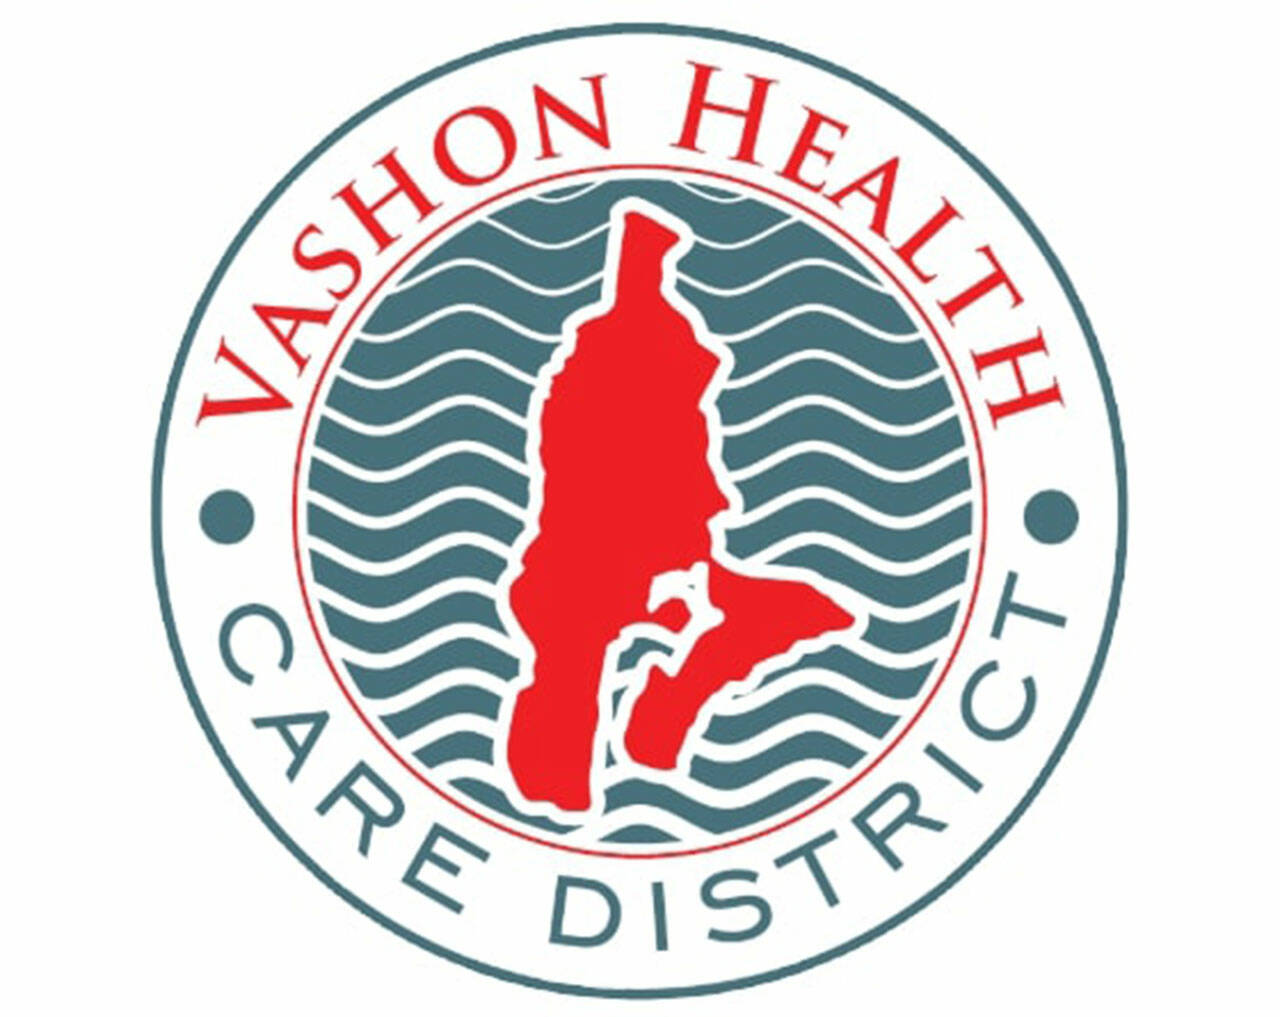 (Image Courtesy Vashon Healthcare District) The Vashon Healthcare District commissioners passed a $1.95 million levy and budget for 2022 at their Nov. 17 meeting.